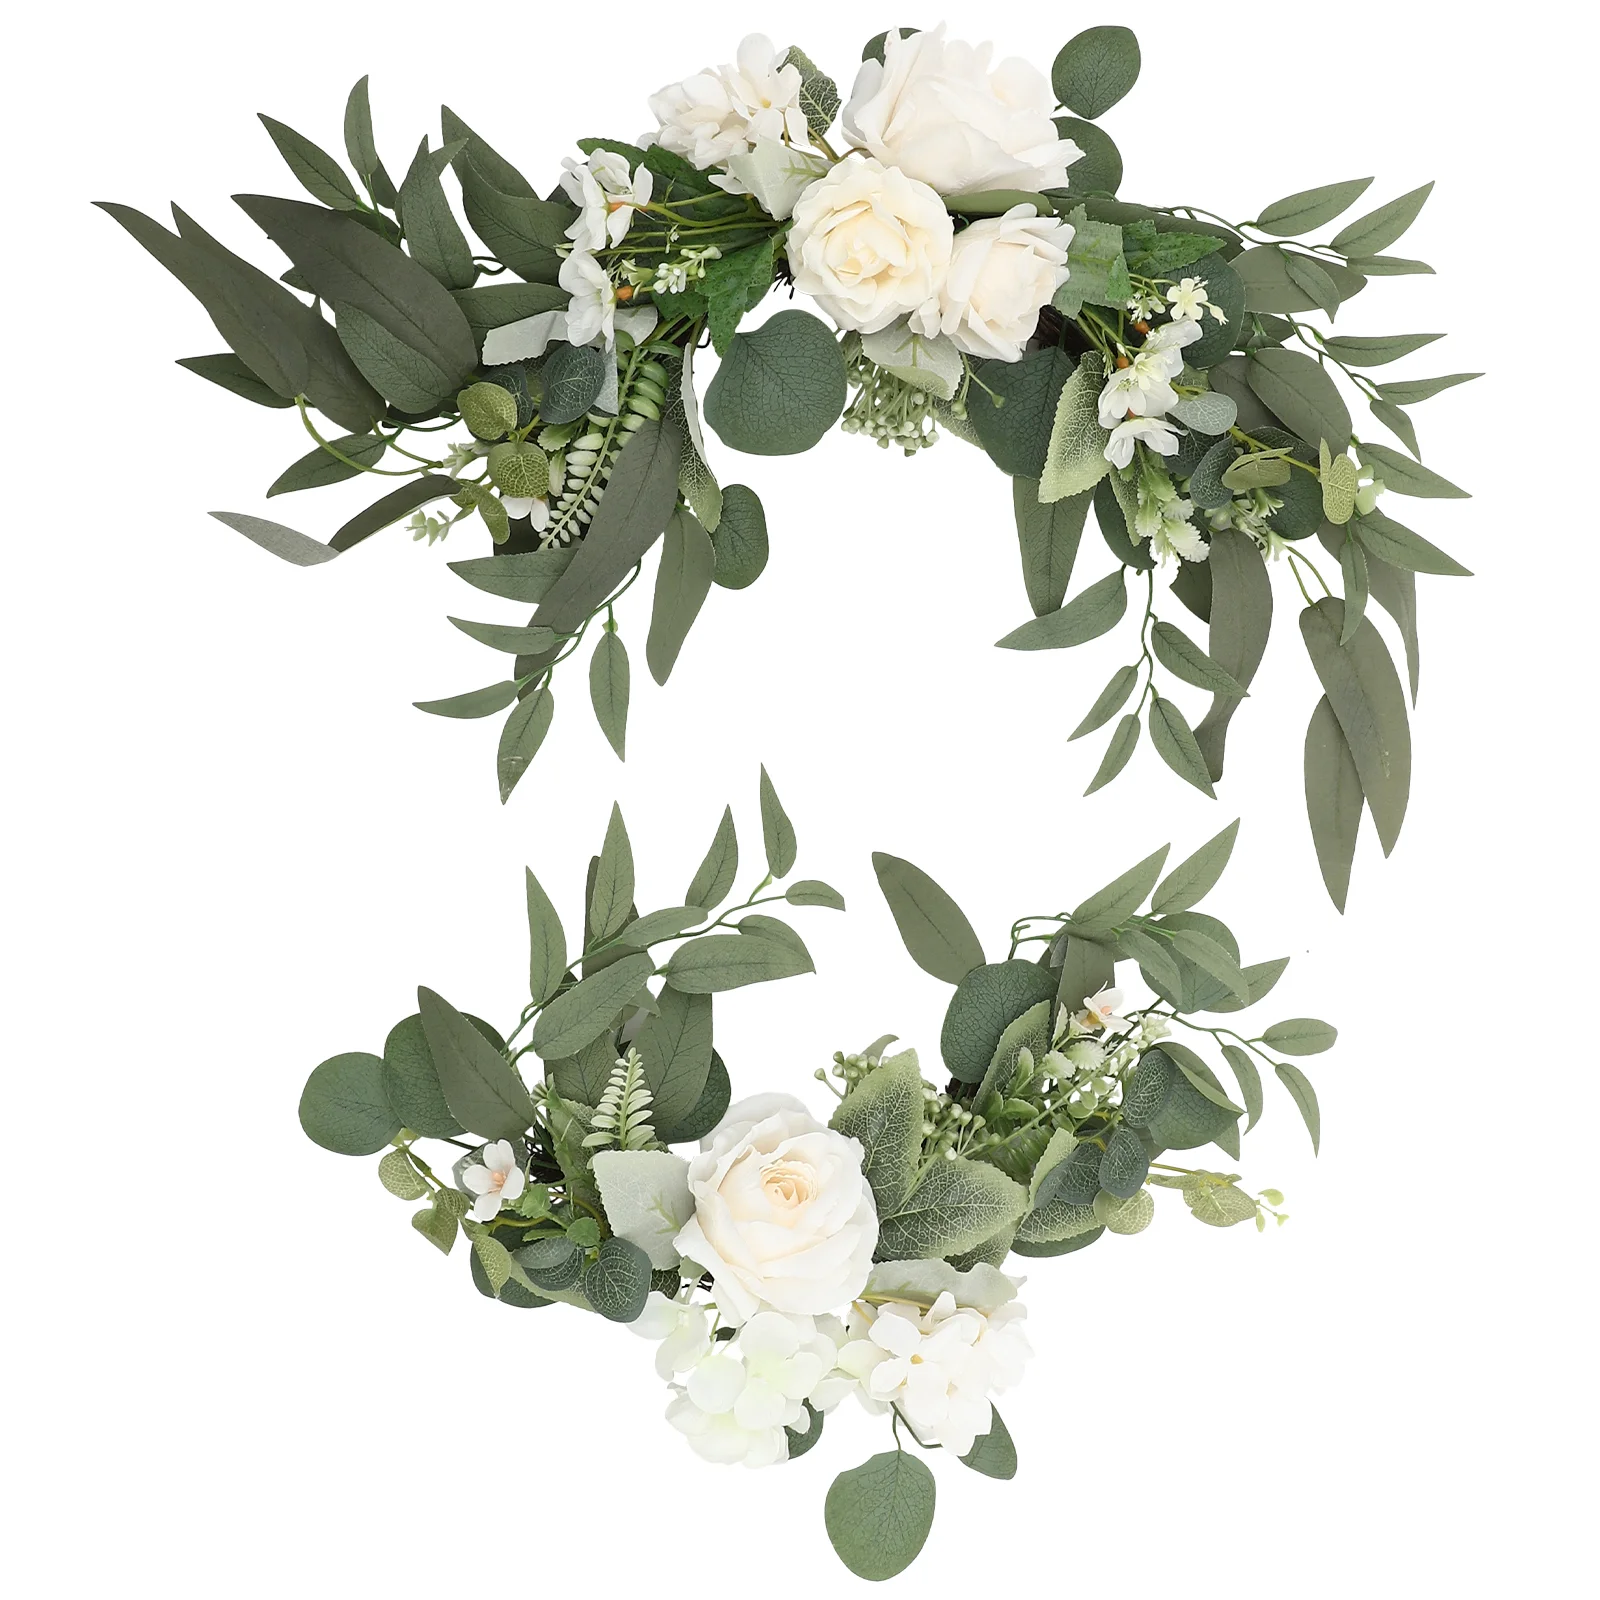 

Welcome Card Water Flower Sign Arch Garland Floral for Door Decor Artificial Ornament Simple DIY Decoration Wedding Swag